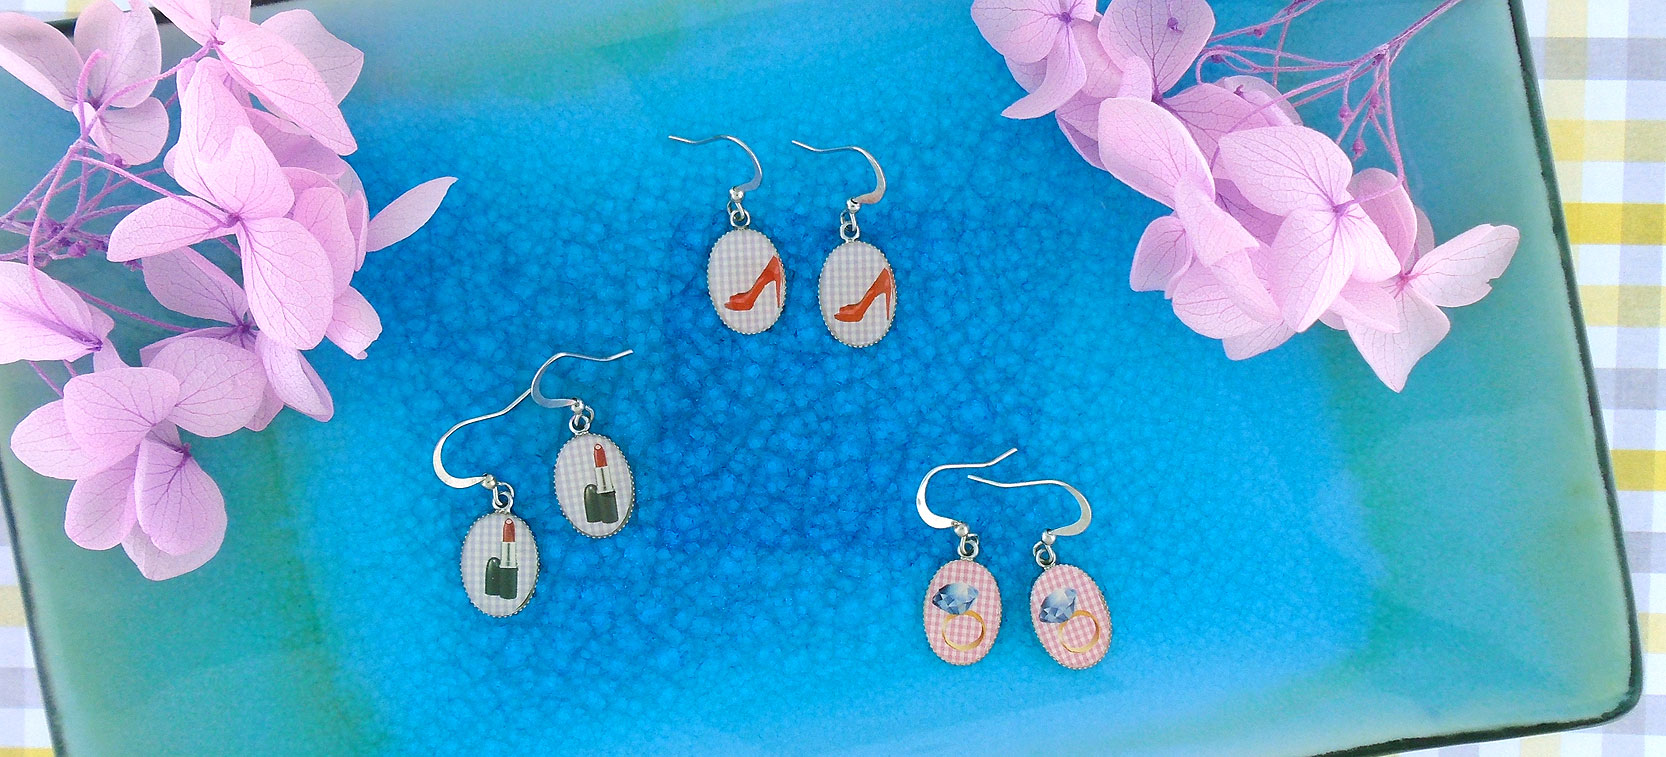 LAVISHY Lovely collection wholesale handmade dainty earrings with fun prints to gift shops, boutiques & book stores in Canada, USA and worldwide.